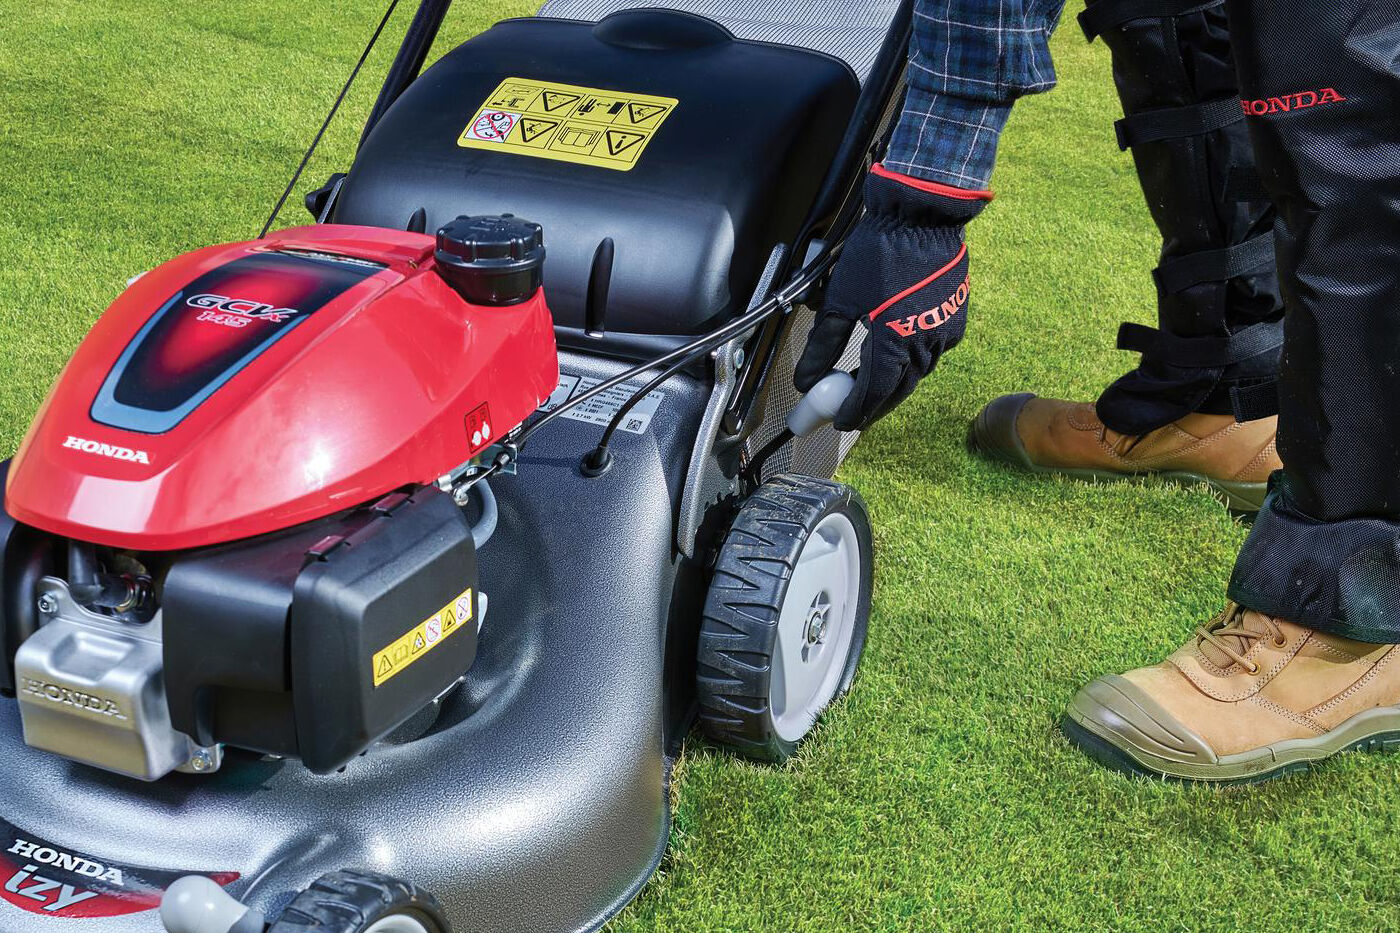 The Best Petrol Lawn Mowers on the Market: A Comprehensive Buying Guide